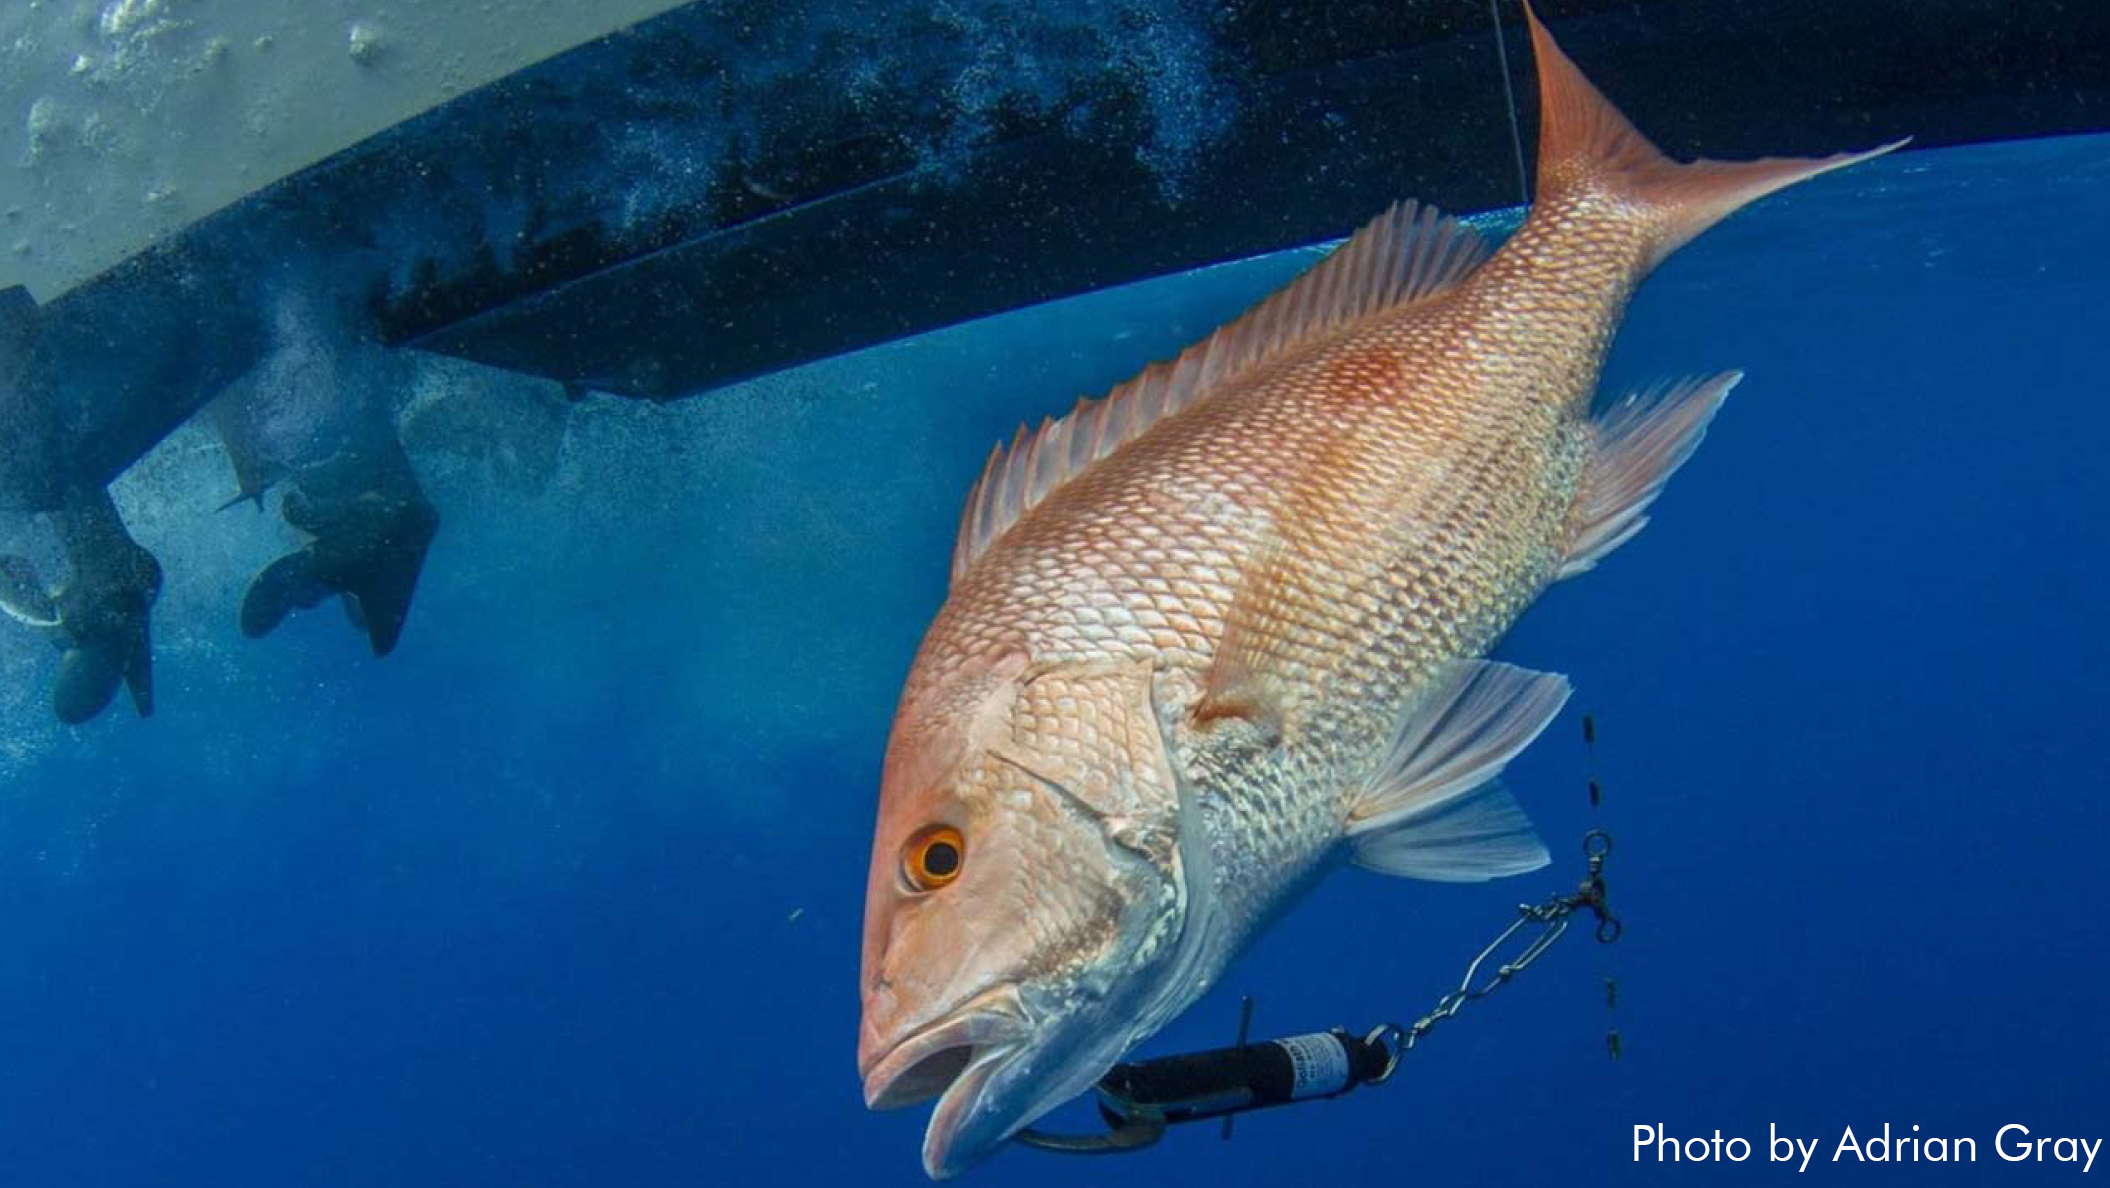 A red snapper is hooked to a descending device in this undated photo by Adrian Gray.